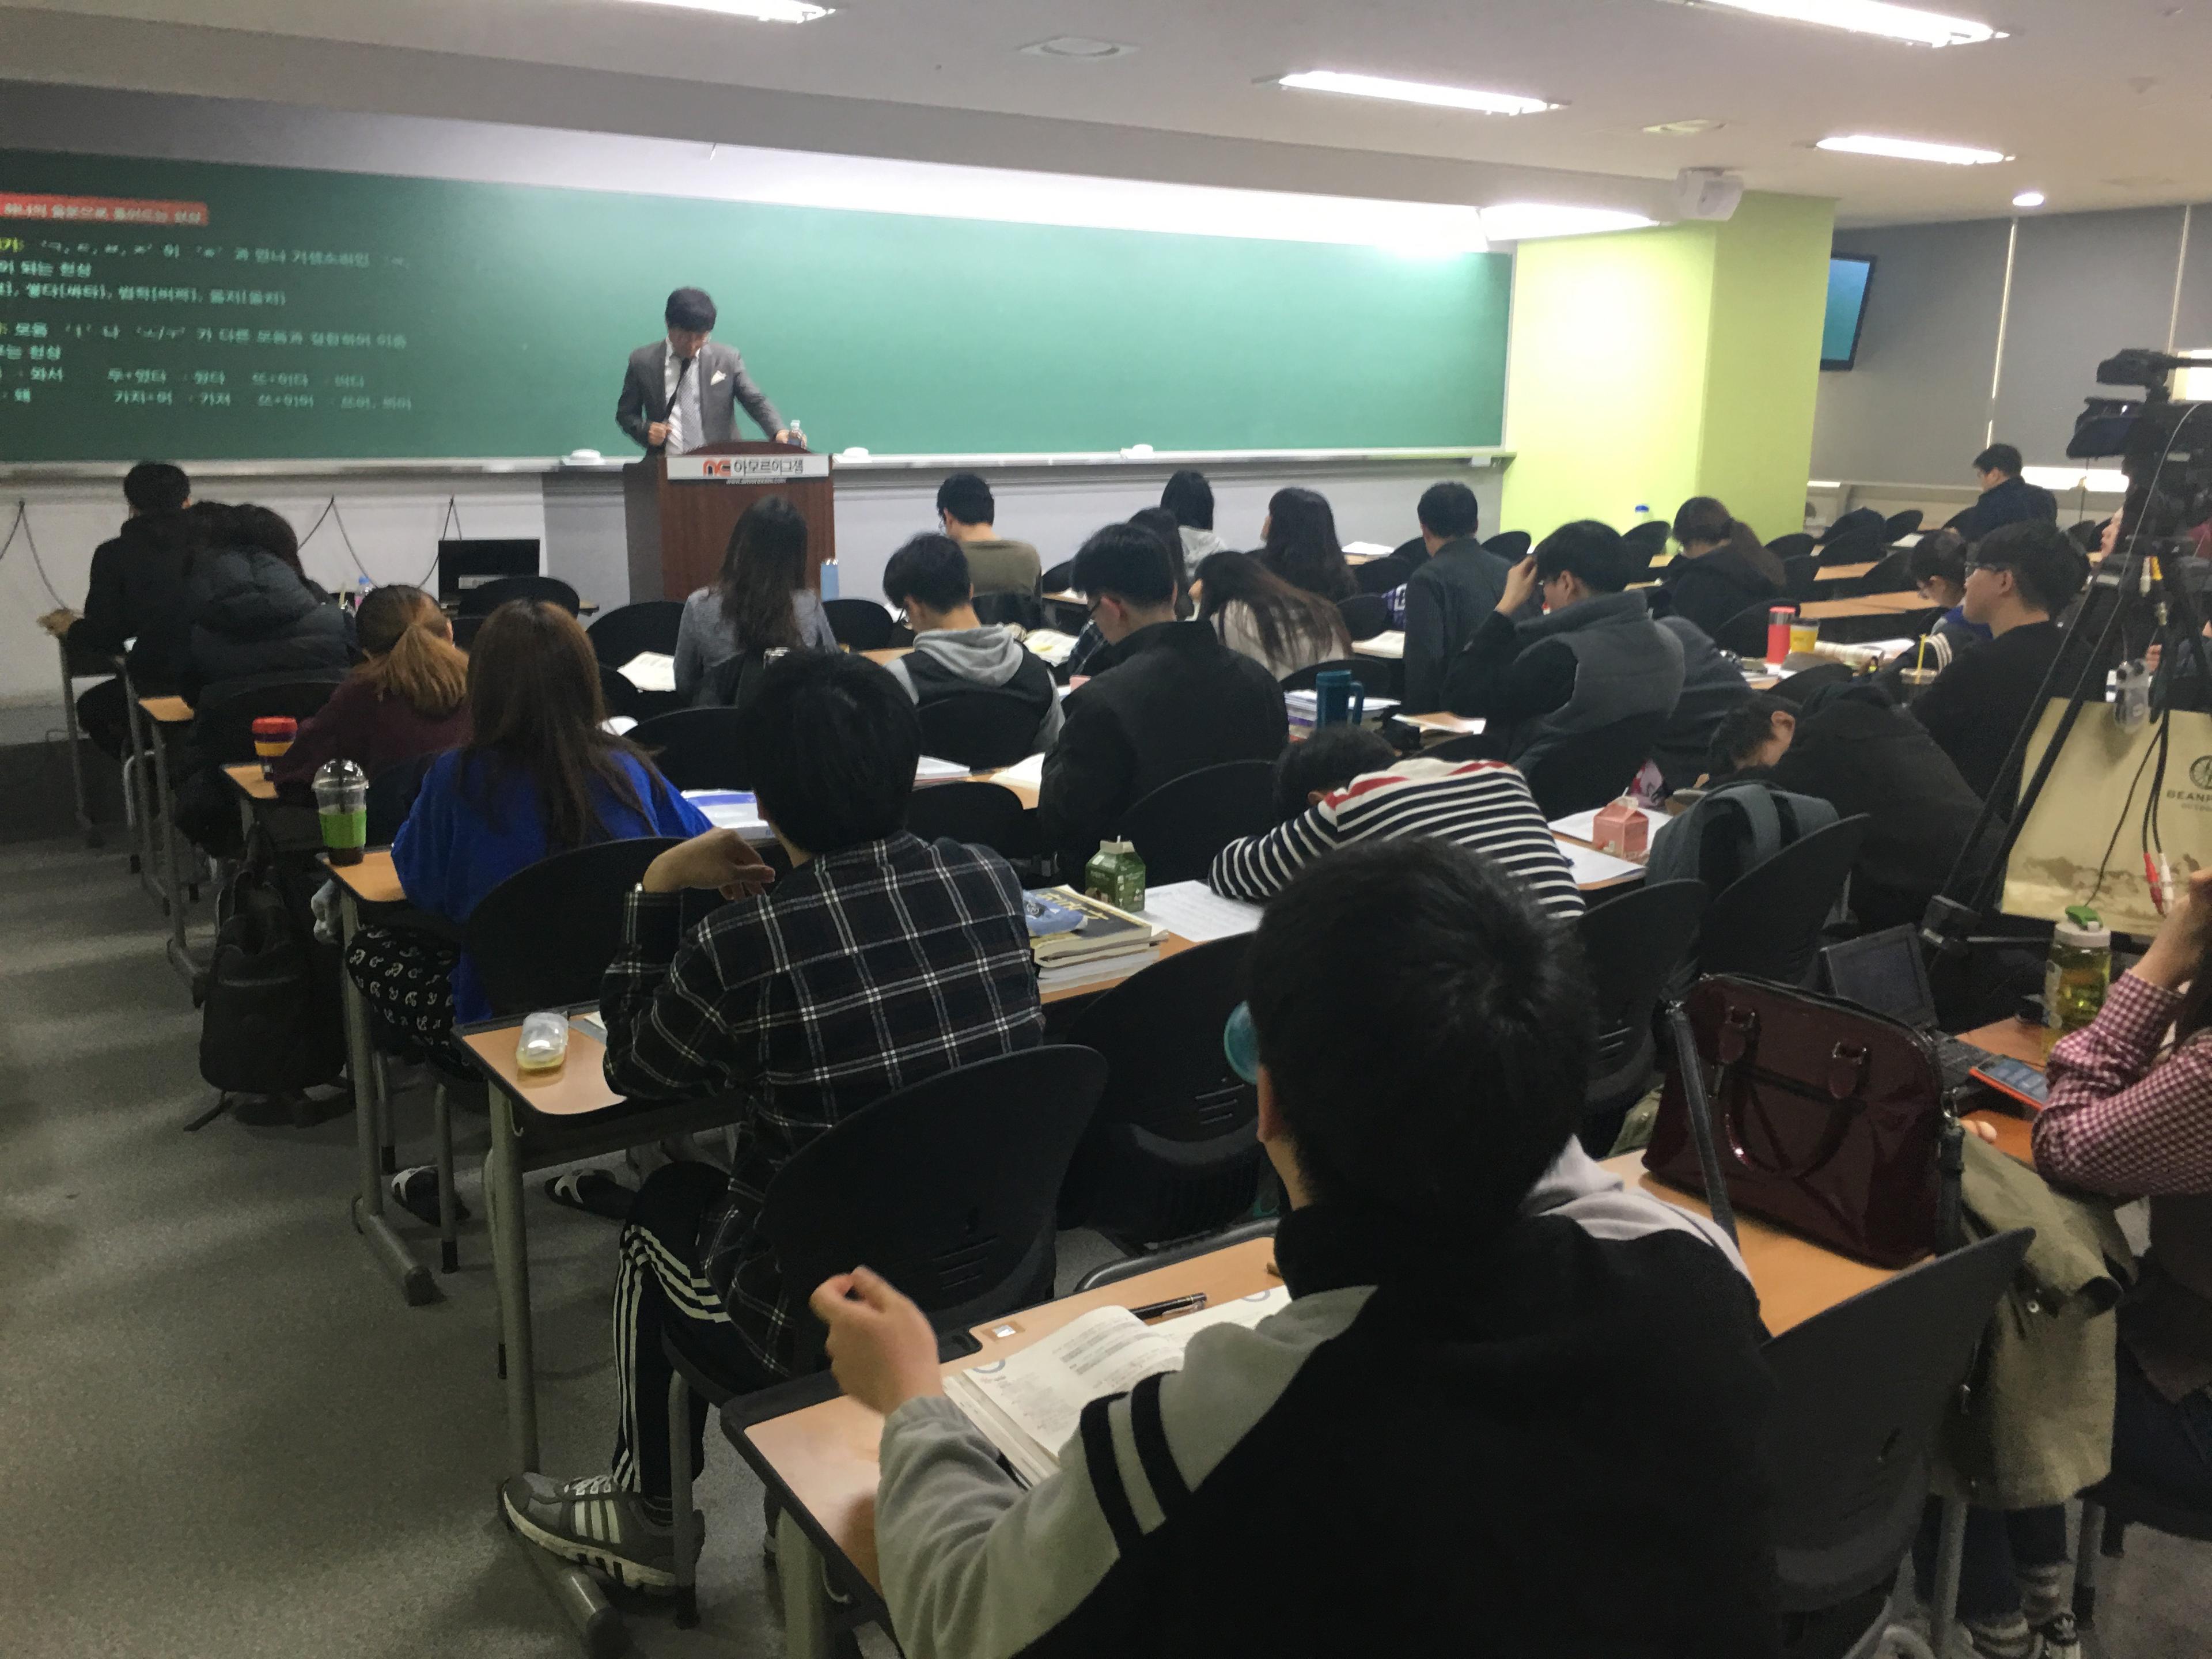 At this cram school in Seoul students study to take the civil servants exam (Photo: Jason Strother)